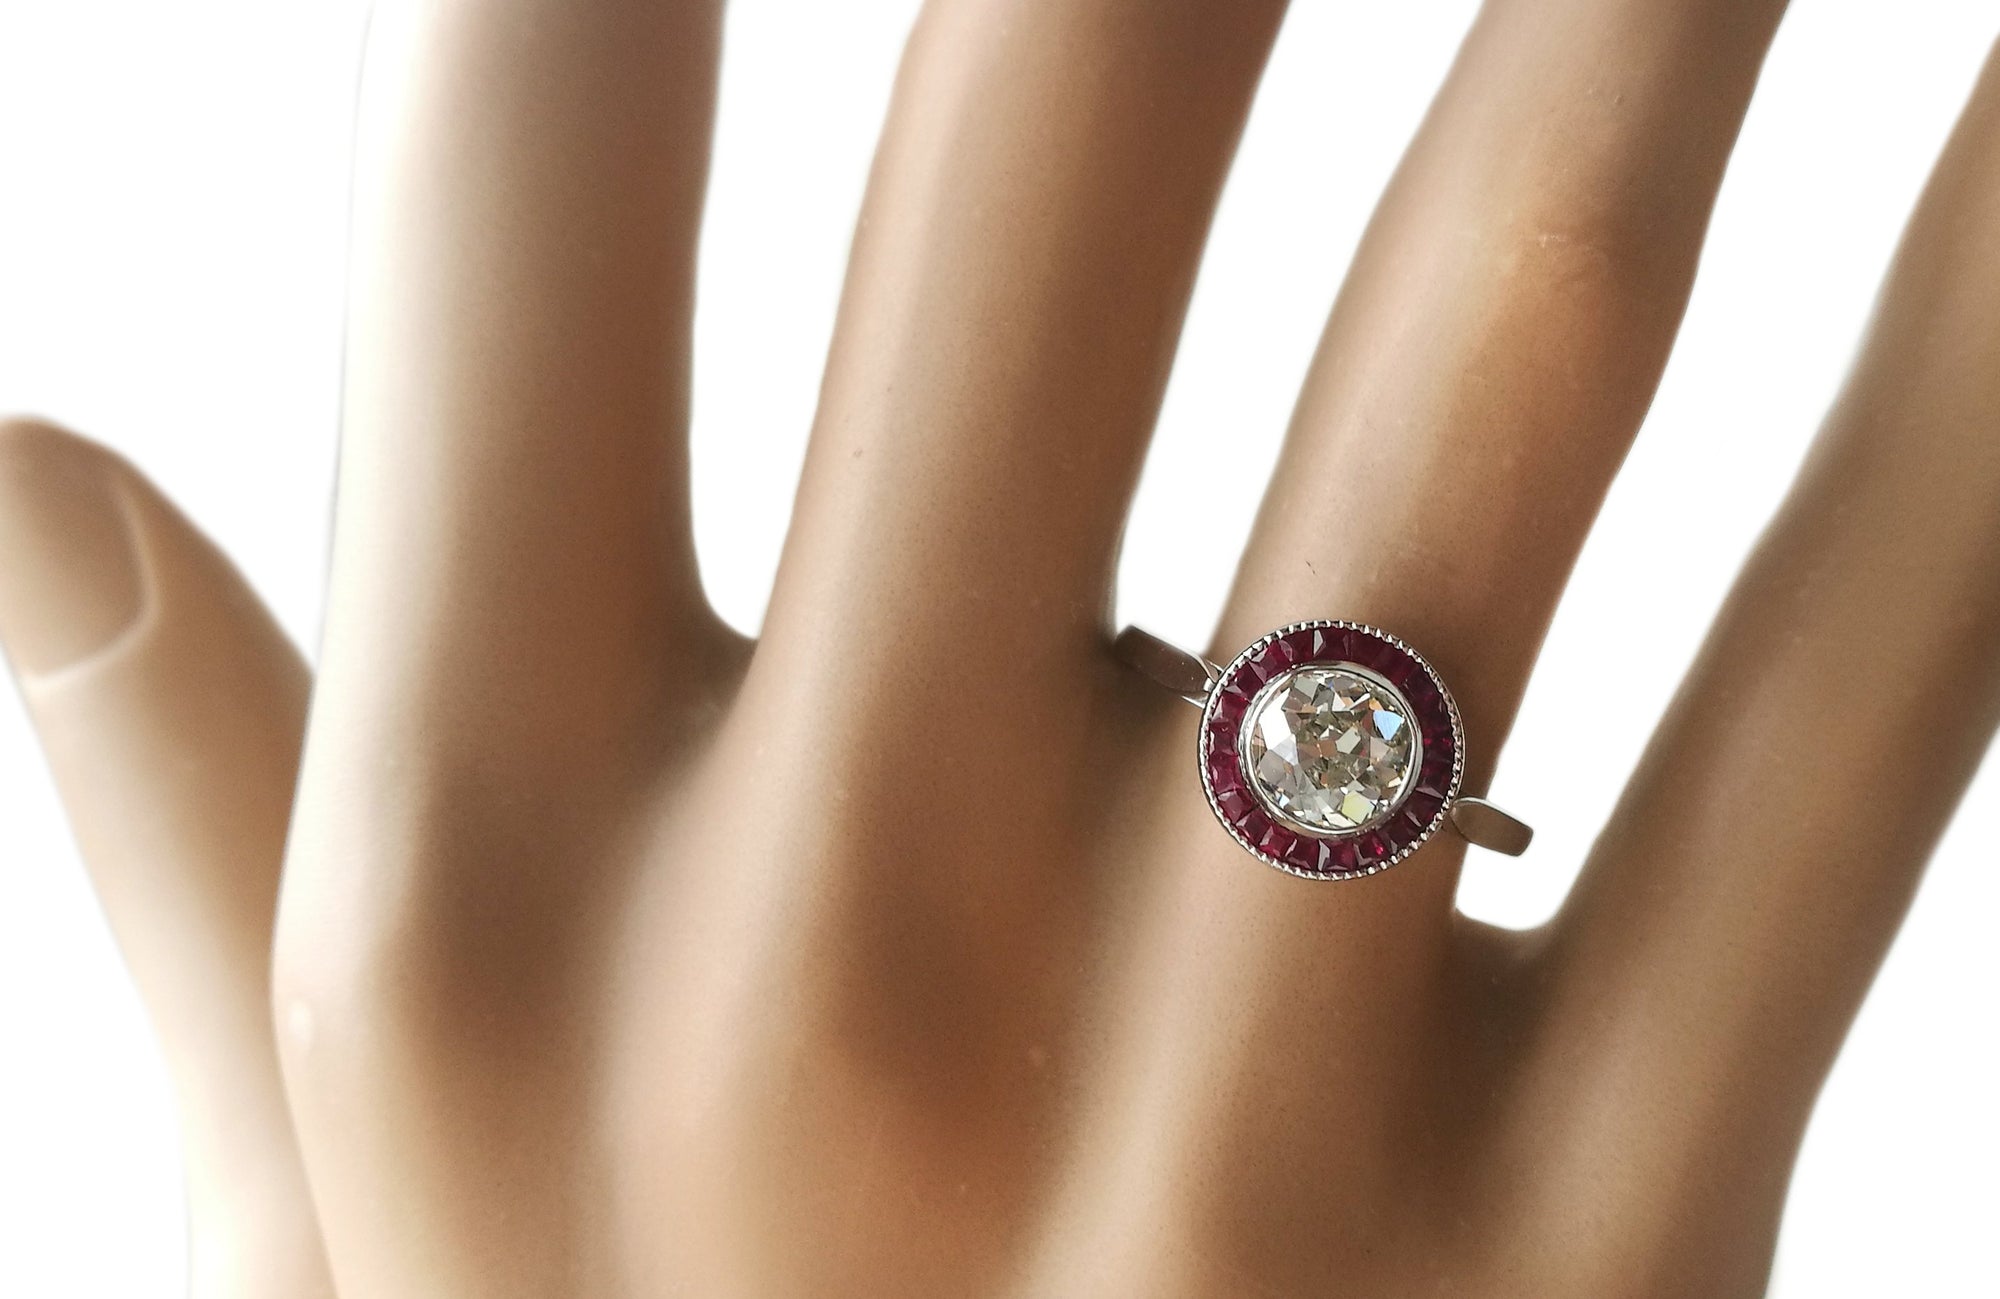 Art Deco 1930s French 1.20ct Diamond & Ruby Halo Target Engagement Ring in Platinum